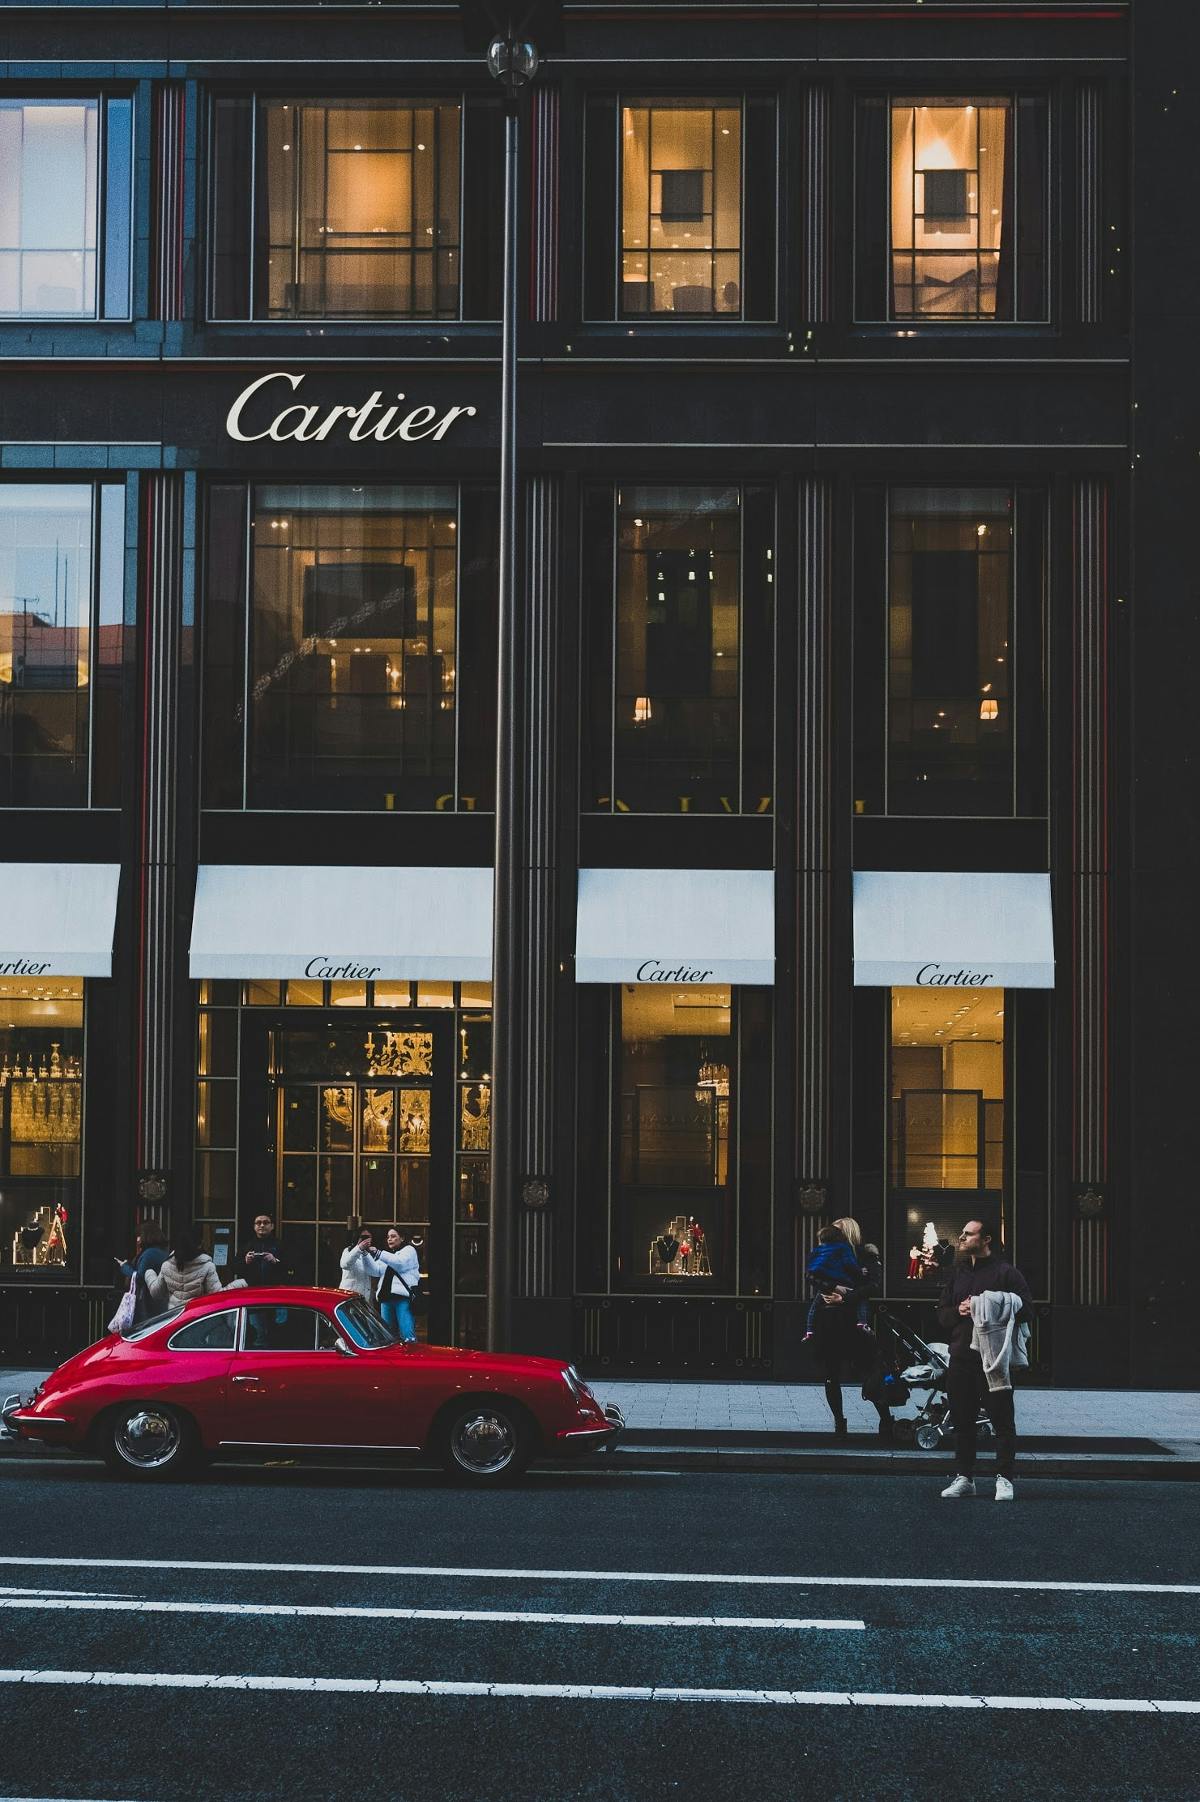   A red foreign car parked in front of the Cartier buildiing.